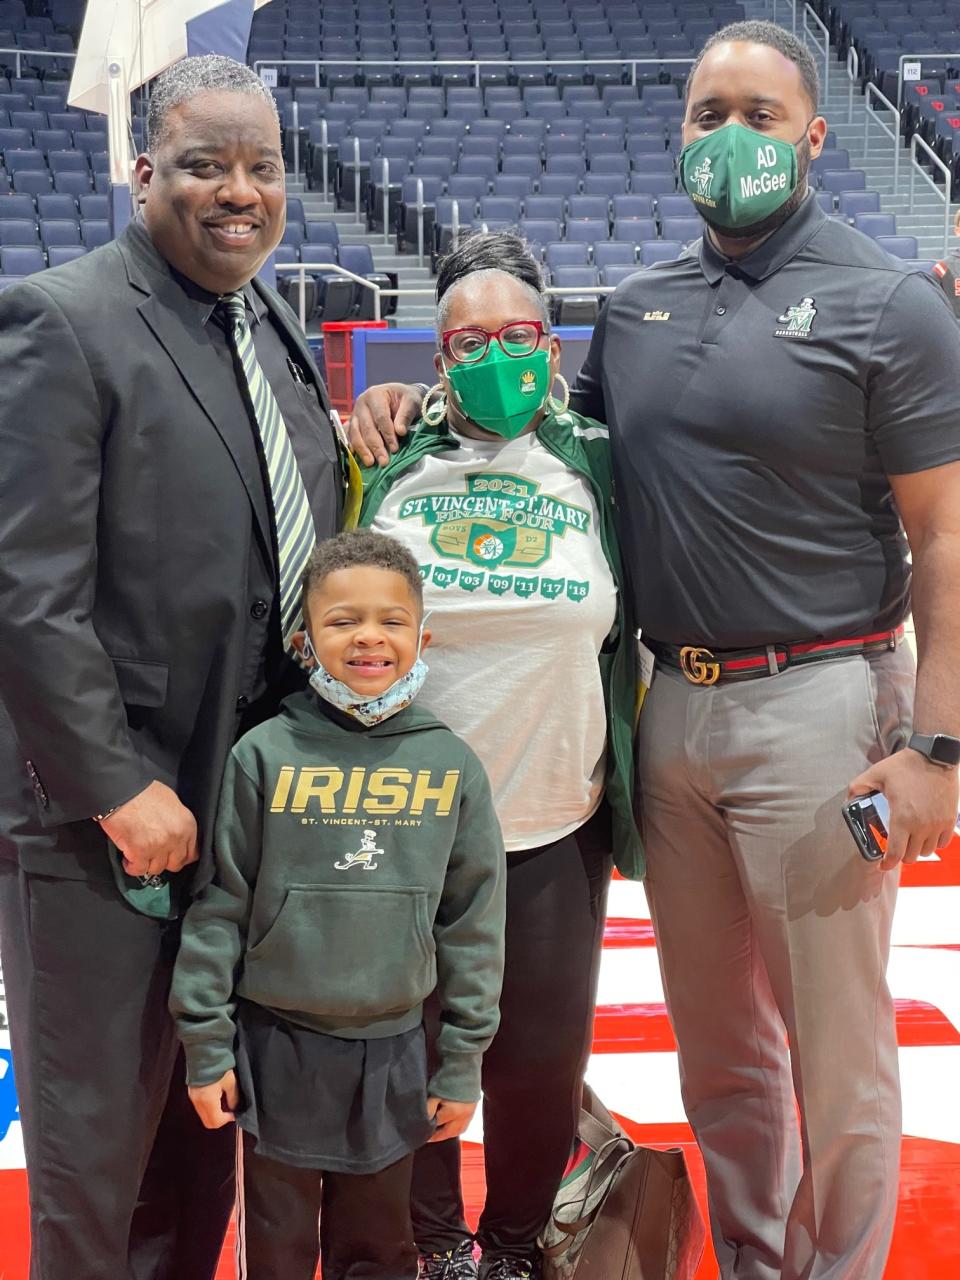 Willie McGee, right, smiles with sister-in-law, Vikkie McGee, nephew, Angelo McGee, and brother, Illya McGee in 2021 after the St. Vincent-St. Mary boys basketball team won the Division II state championship at the University of Dayton Arena.